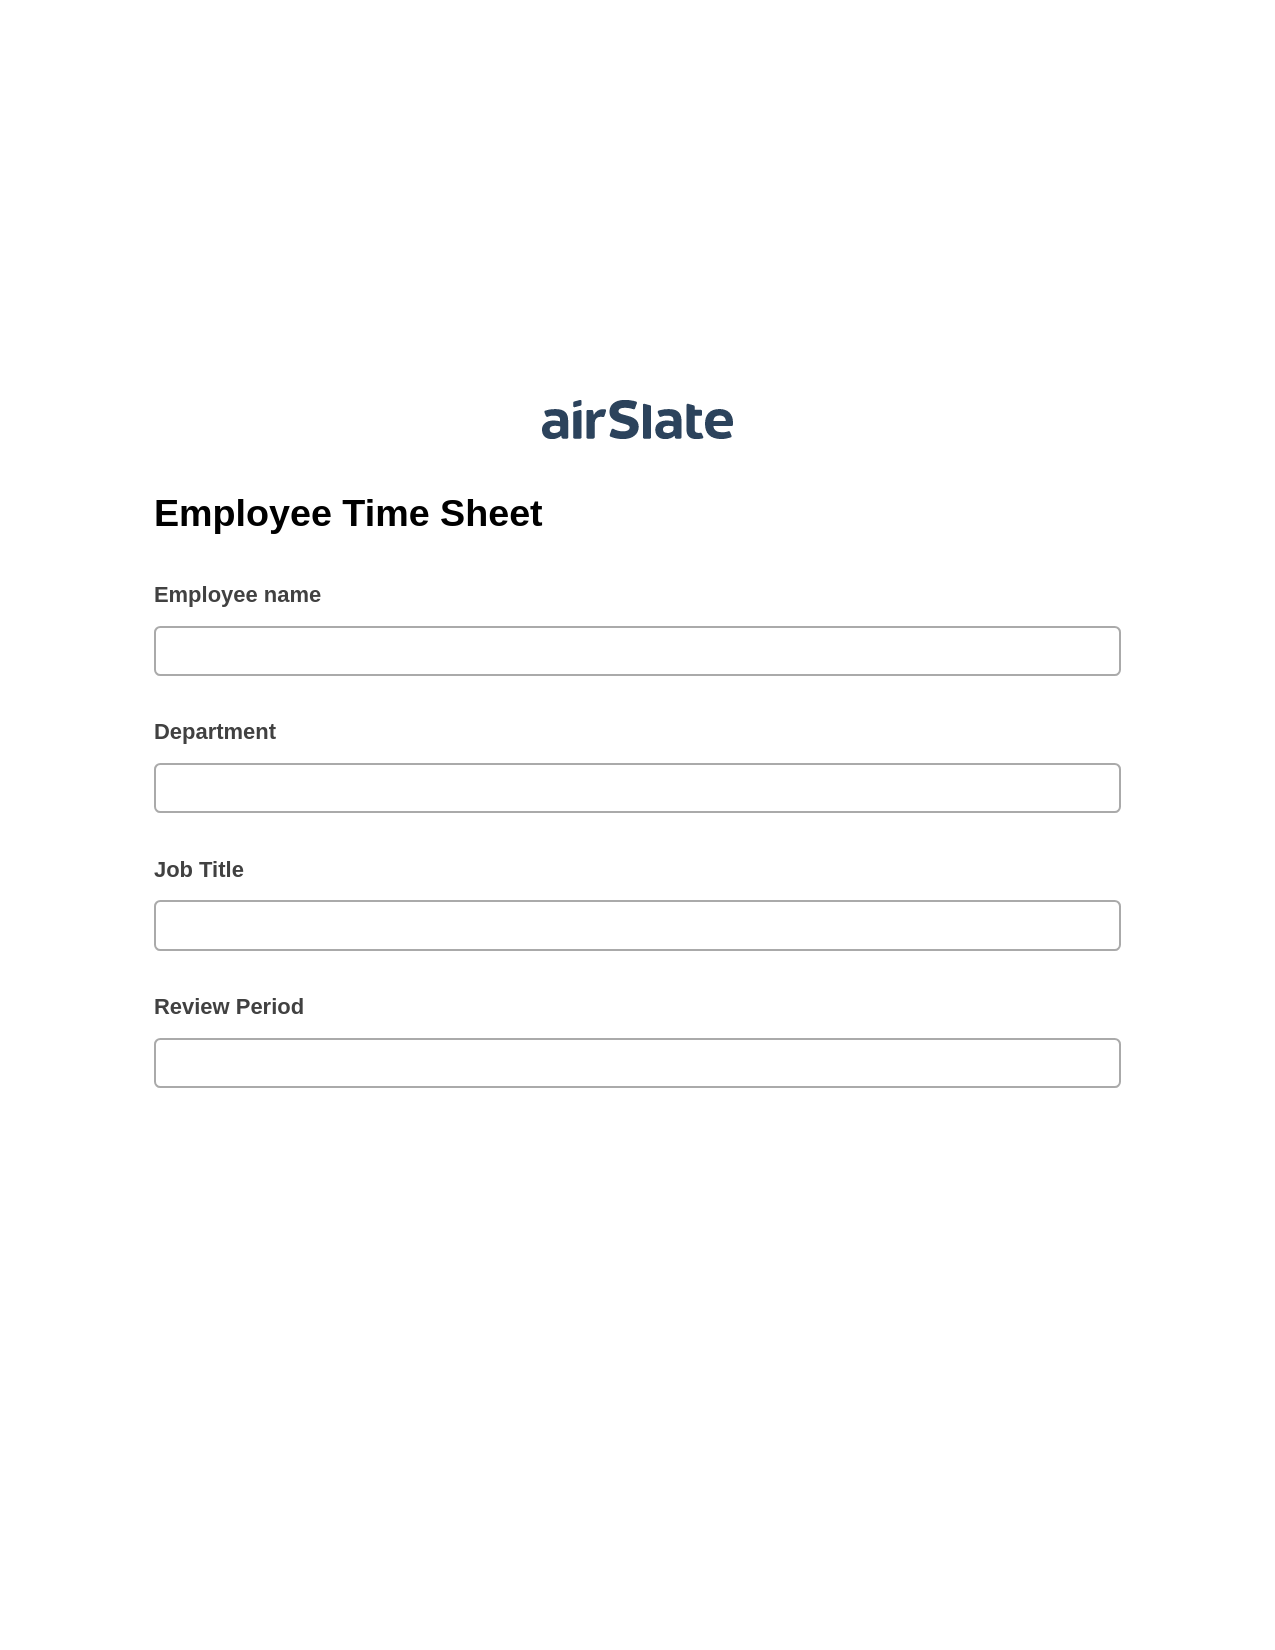 Employee Time Sheet Pre-fill from Excel Spreadsheet Bot, Create slate bot, Archive to Box Bot